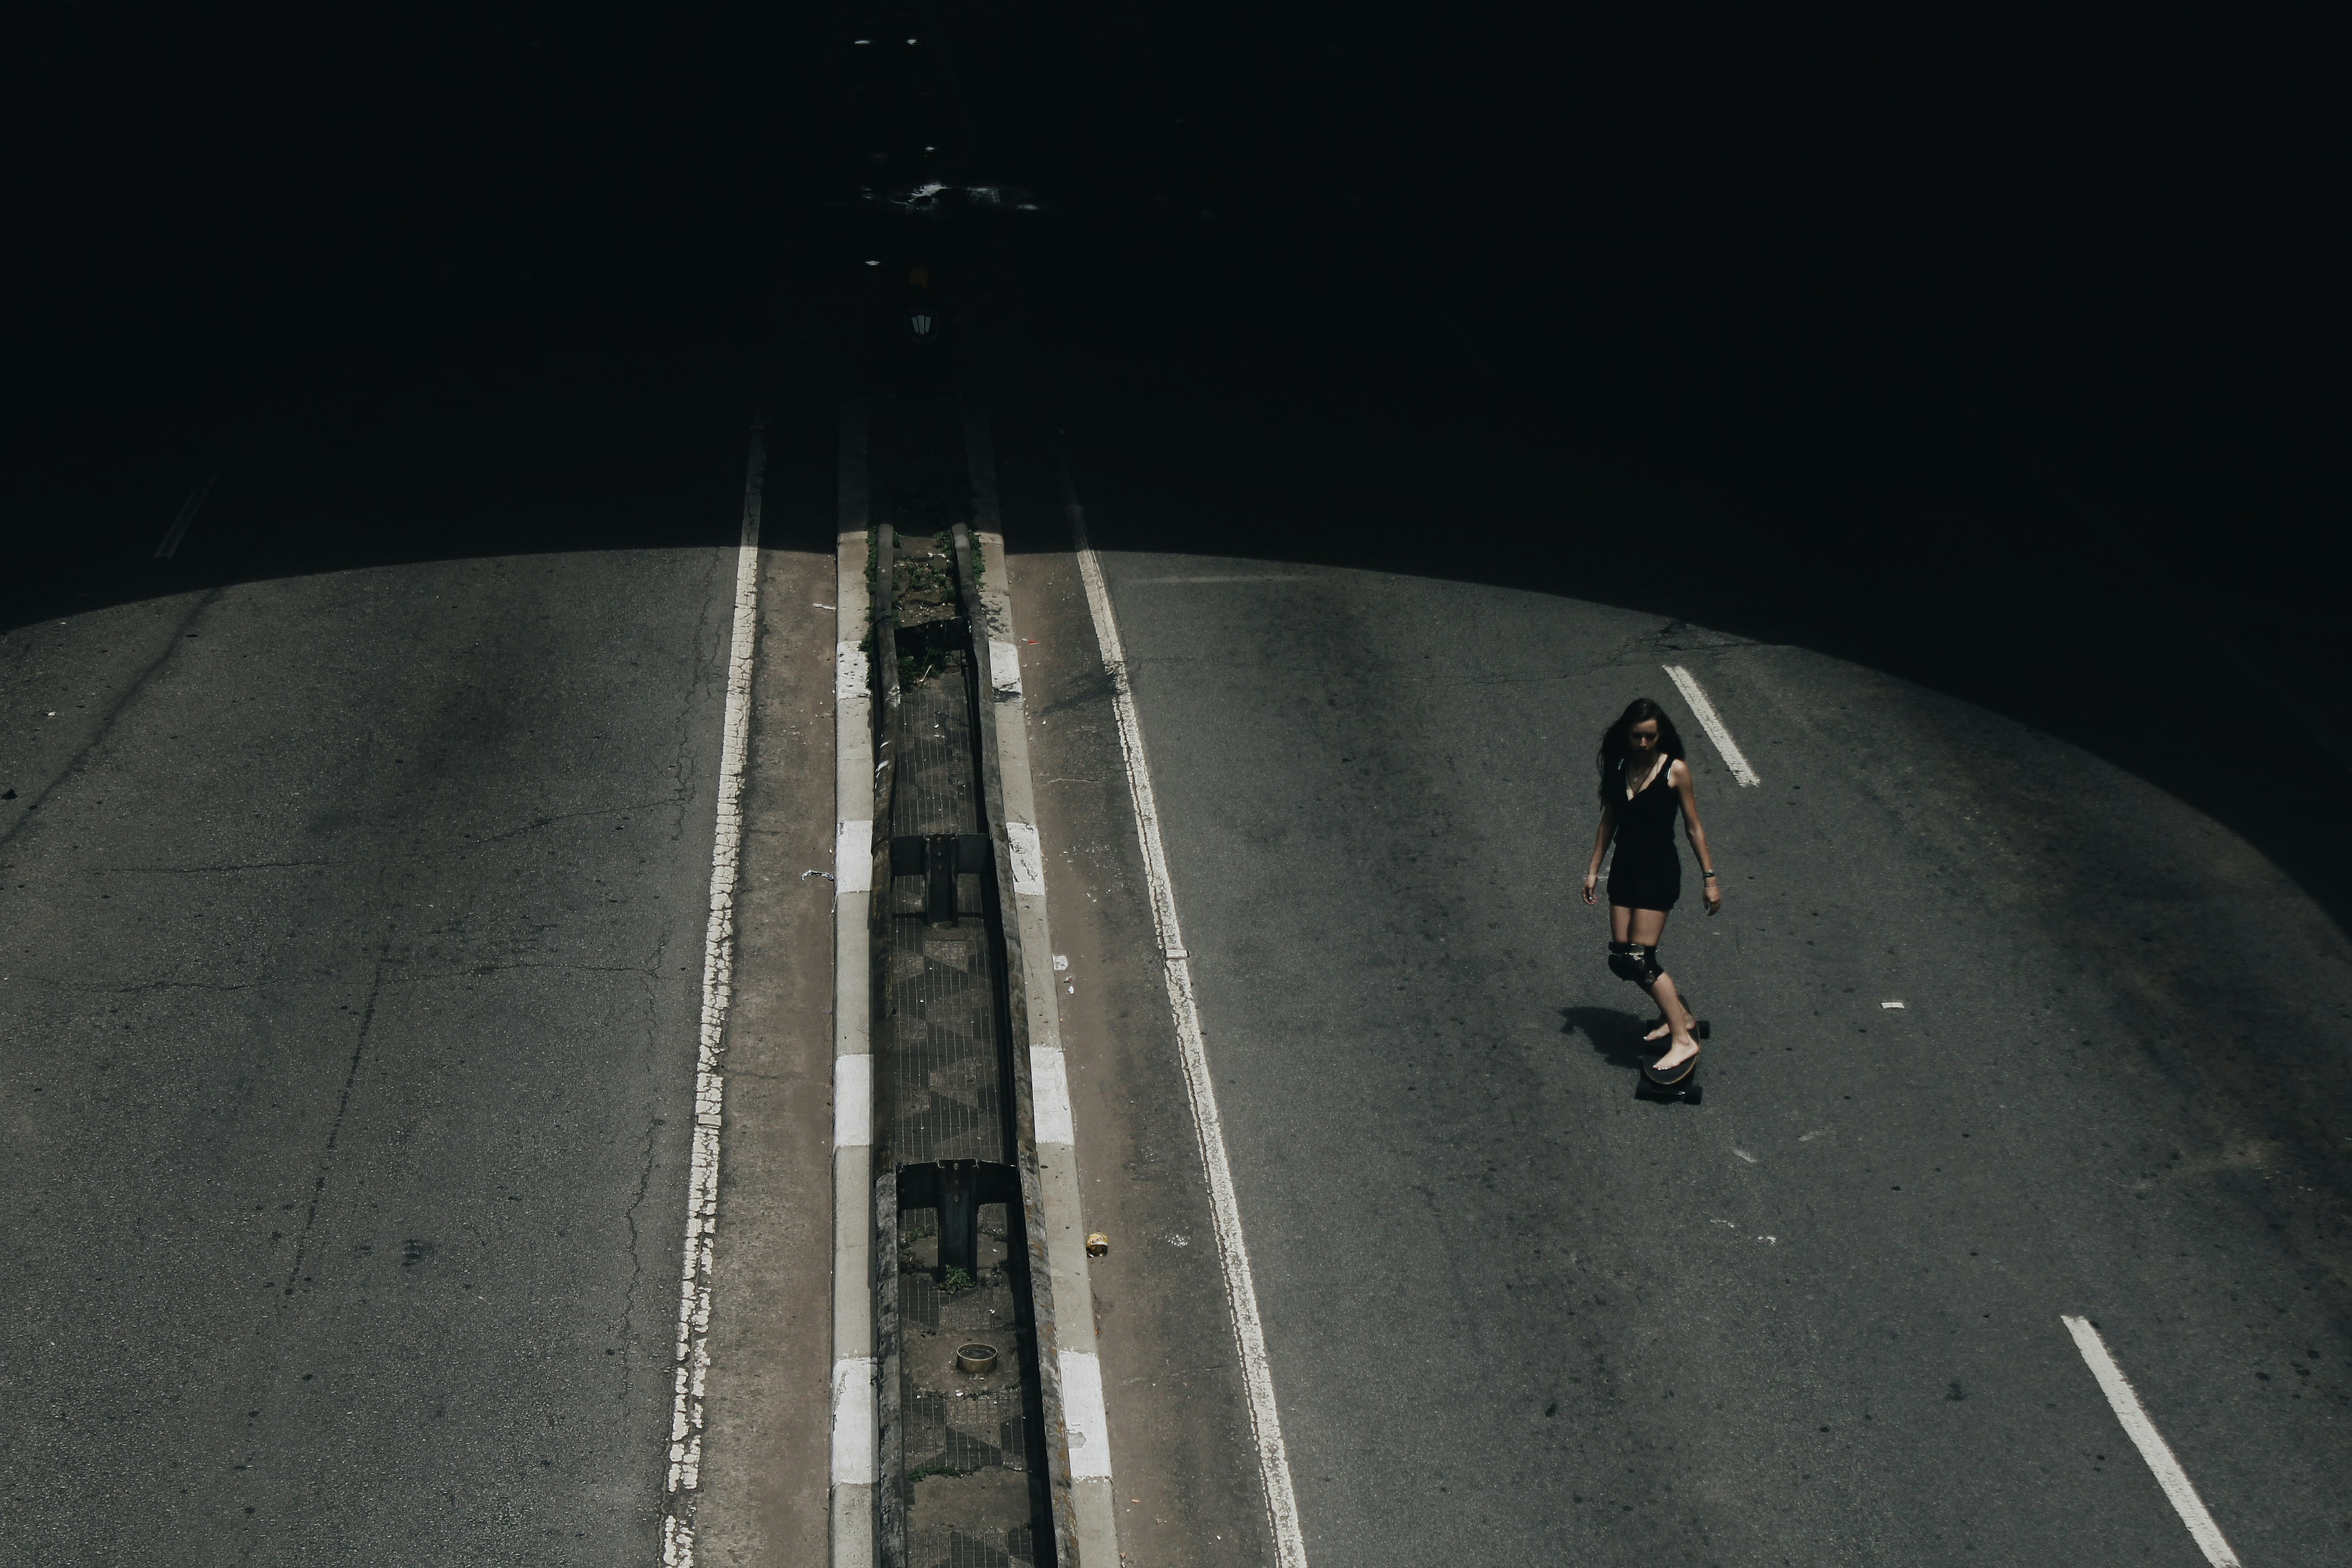 high angle photo of woman riding on skateboard passing road